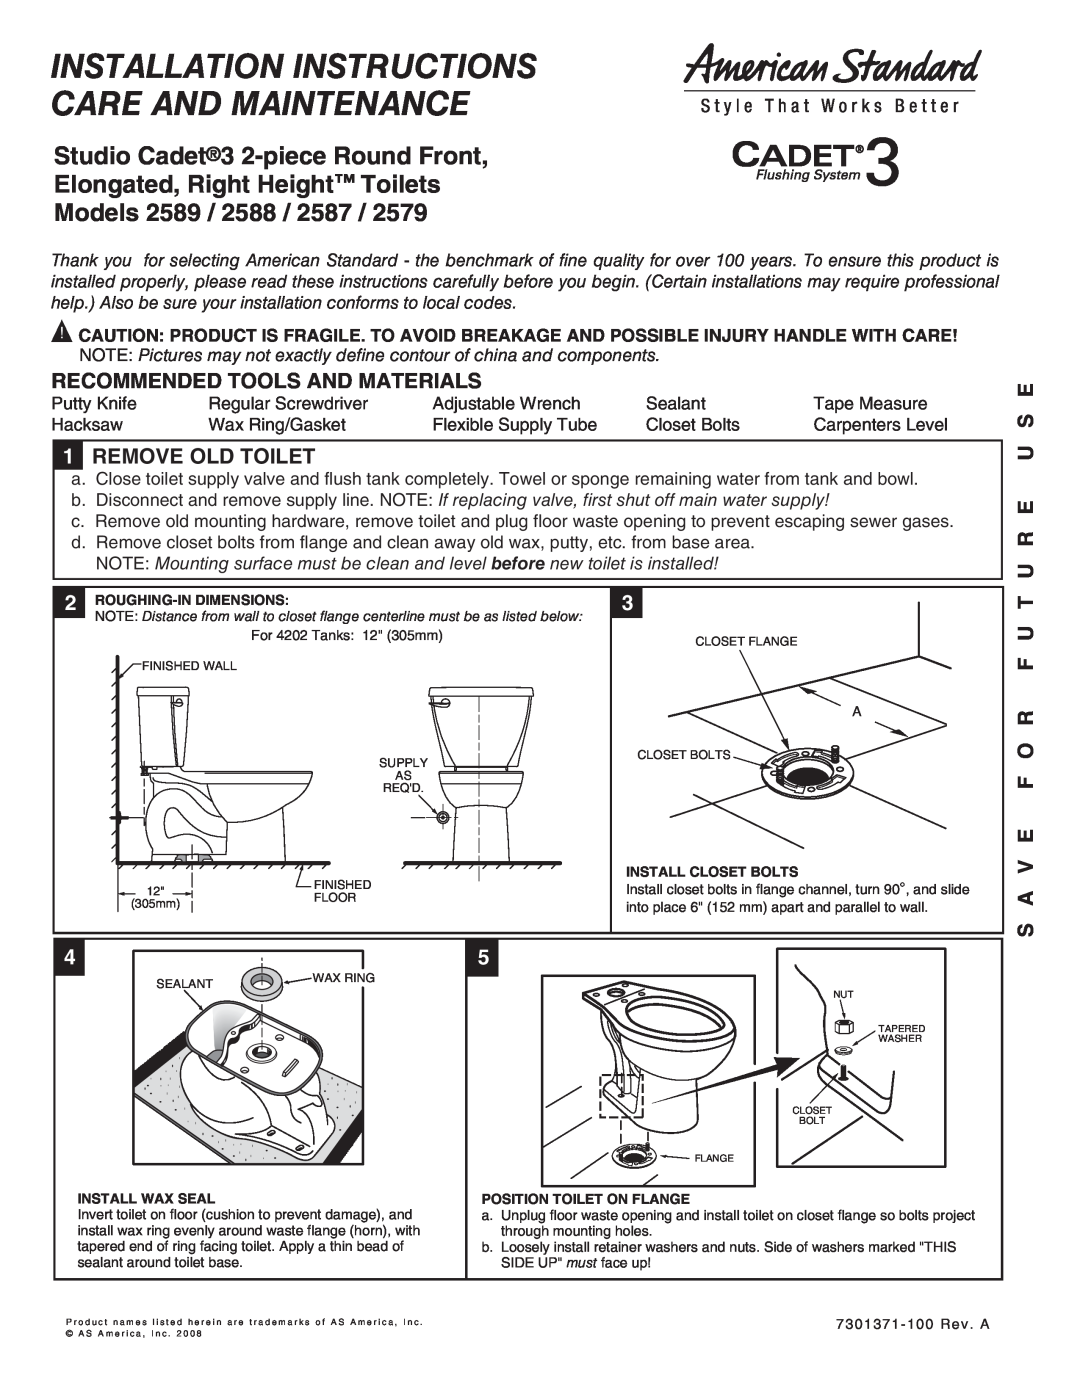 American Standard 2588, 2587 installation instructions Recommended Tools And Materials, 1REMOVE OLD TOILET, U R E U S E 